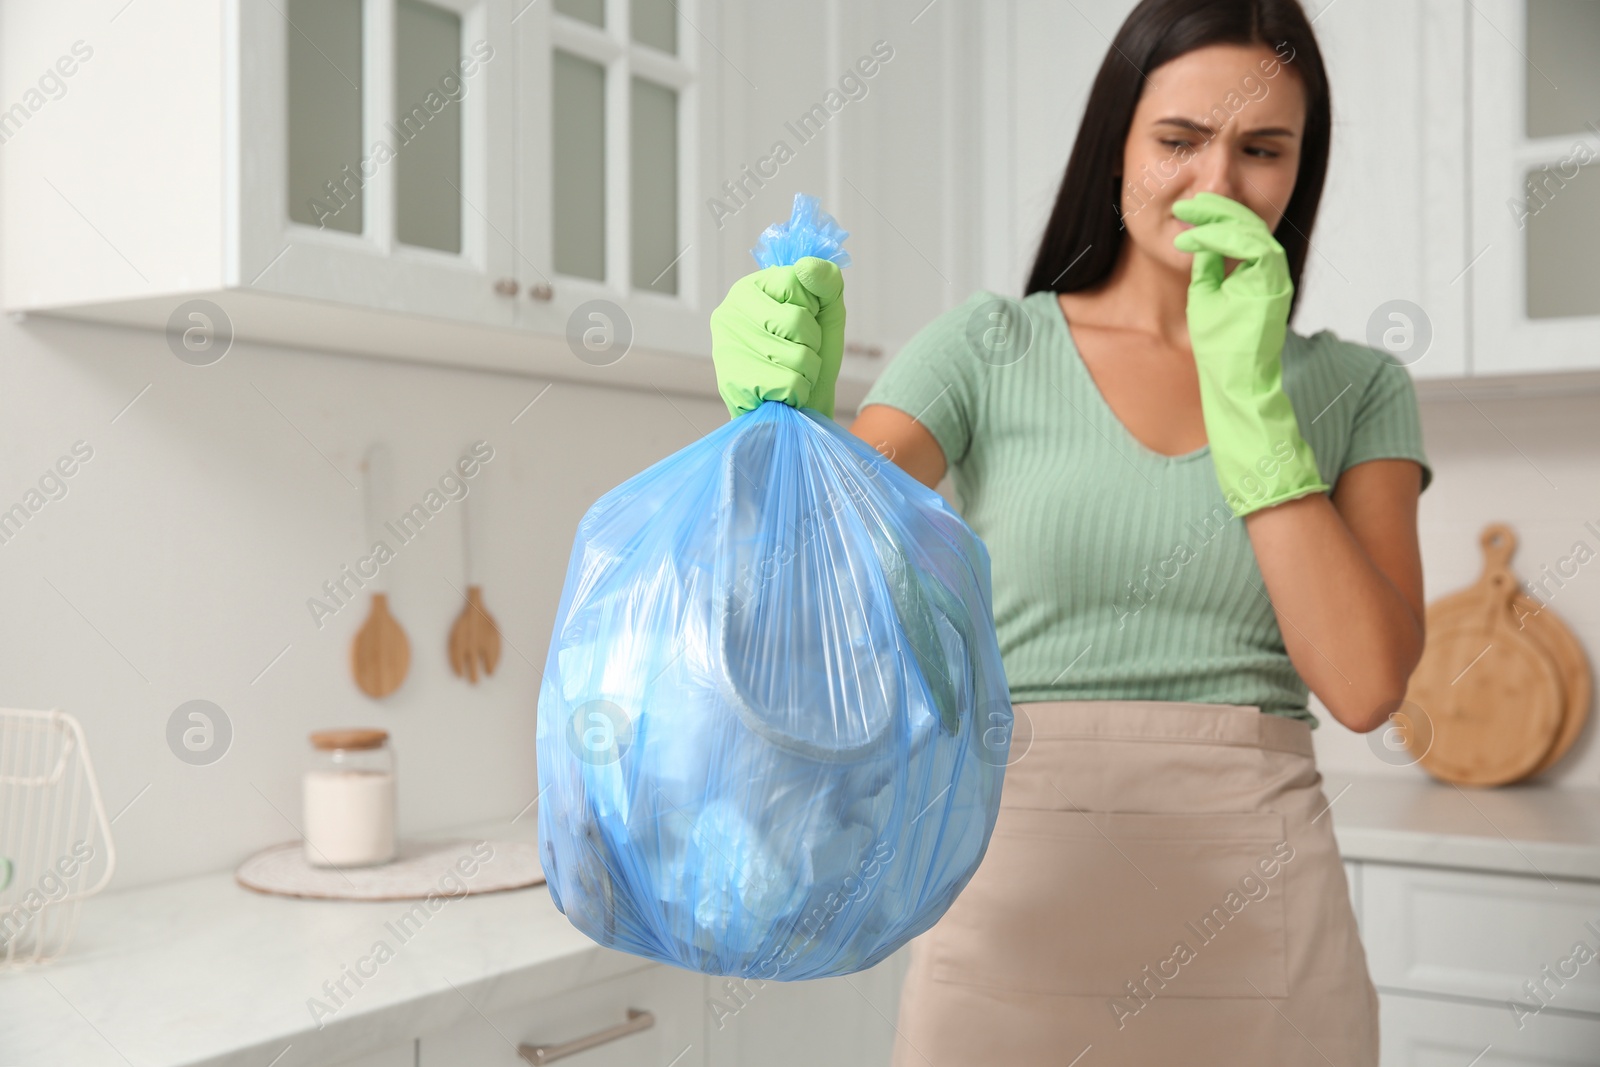 Photo of Woman holding full garbage bag at home, focus on hand